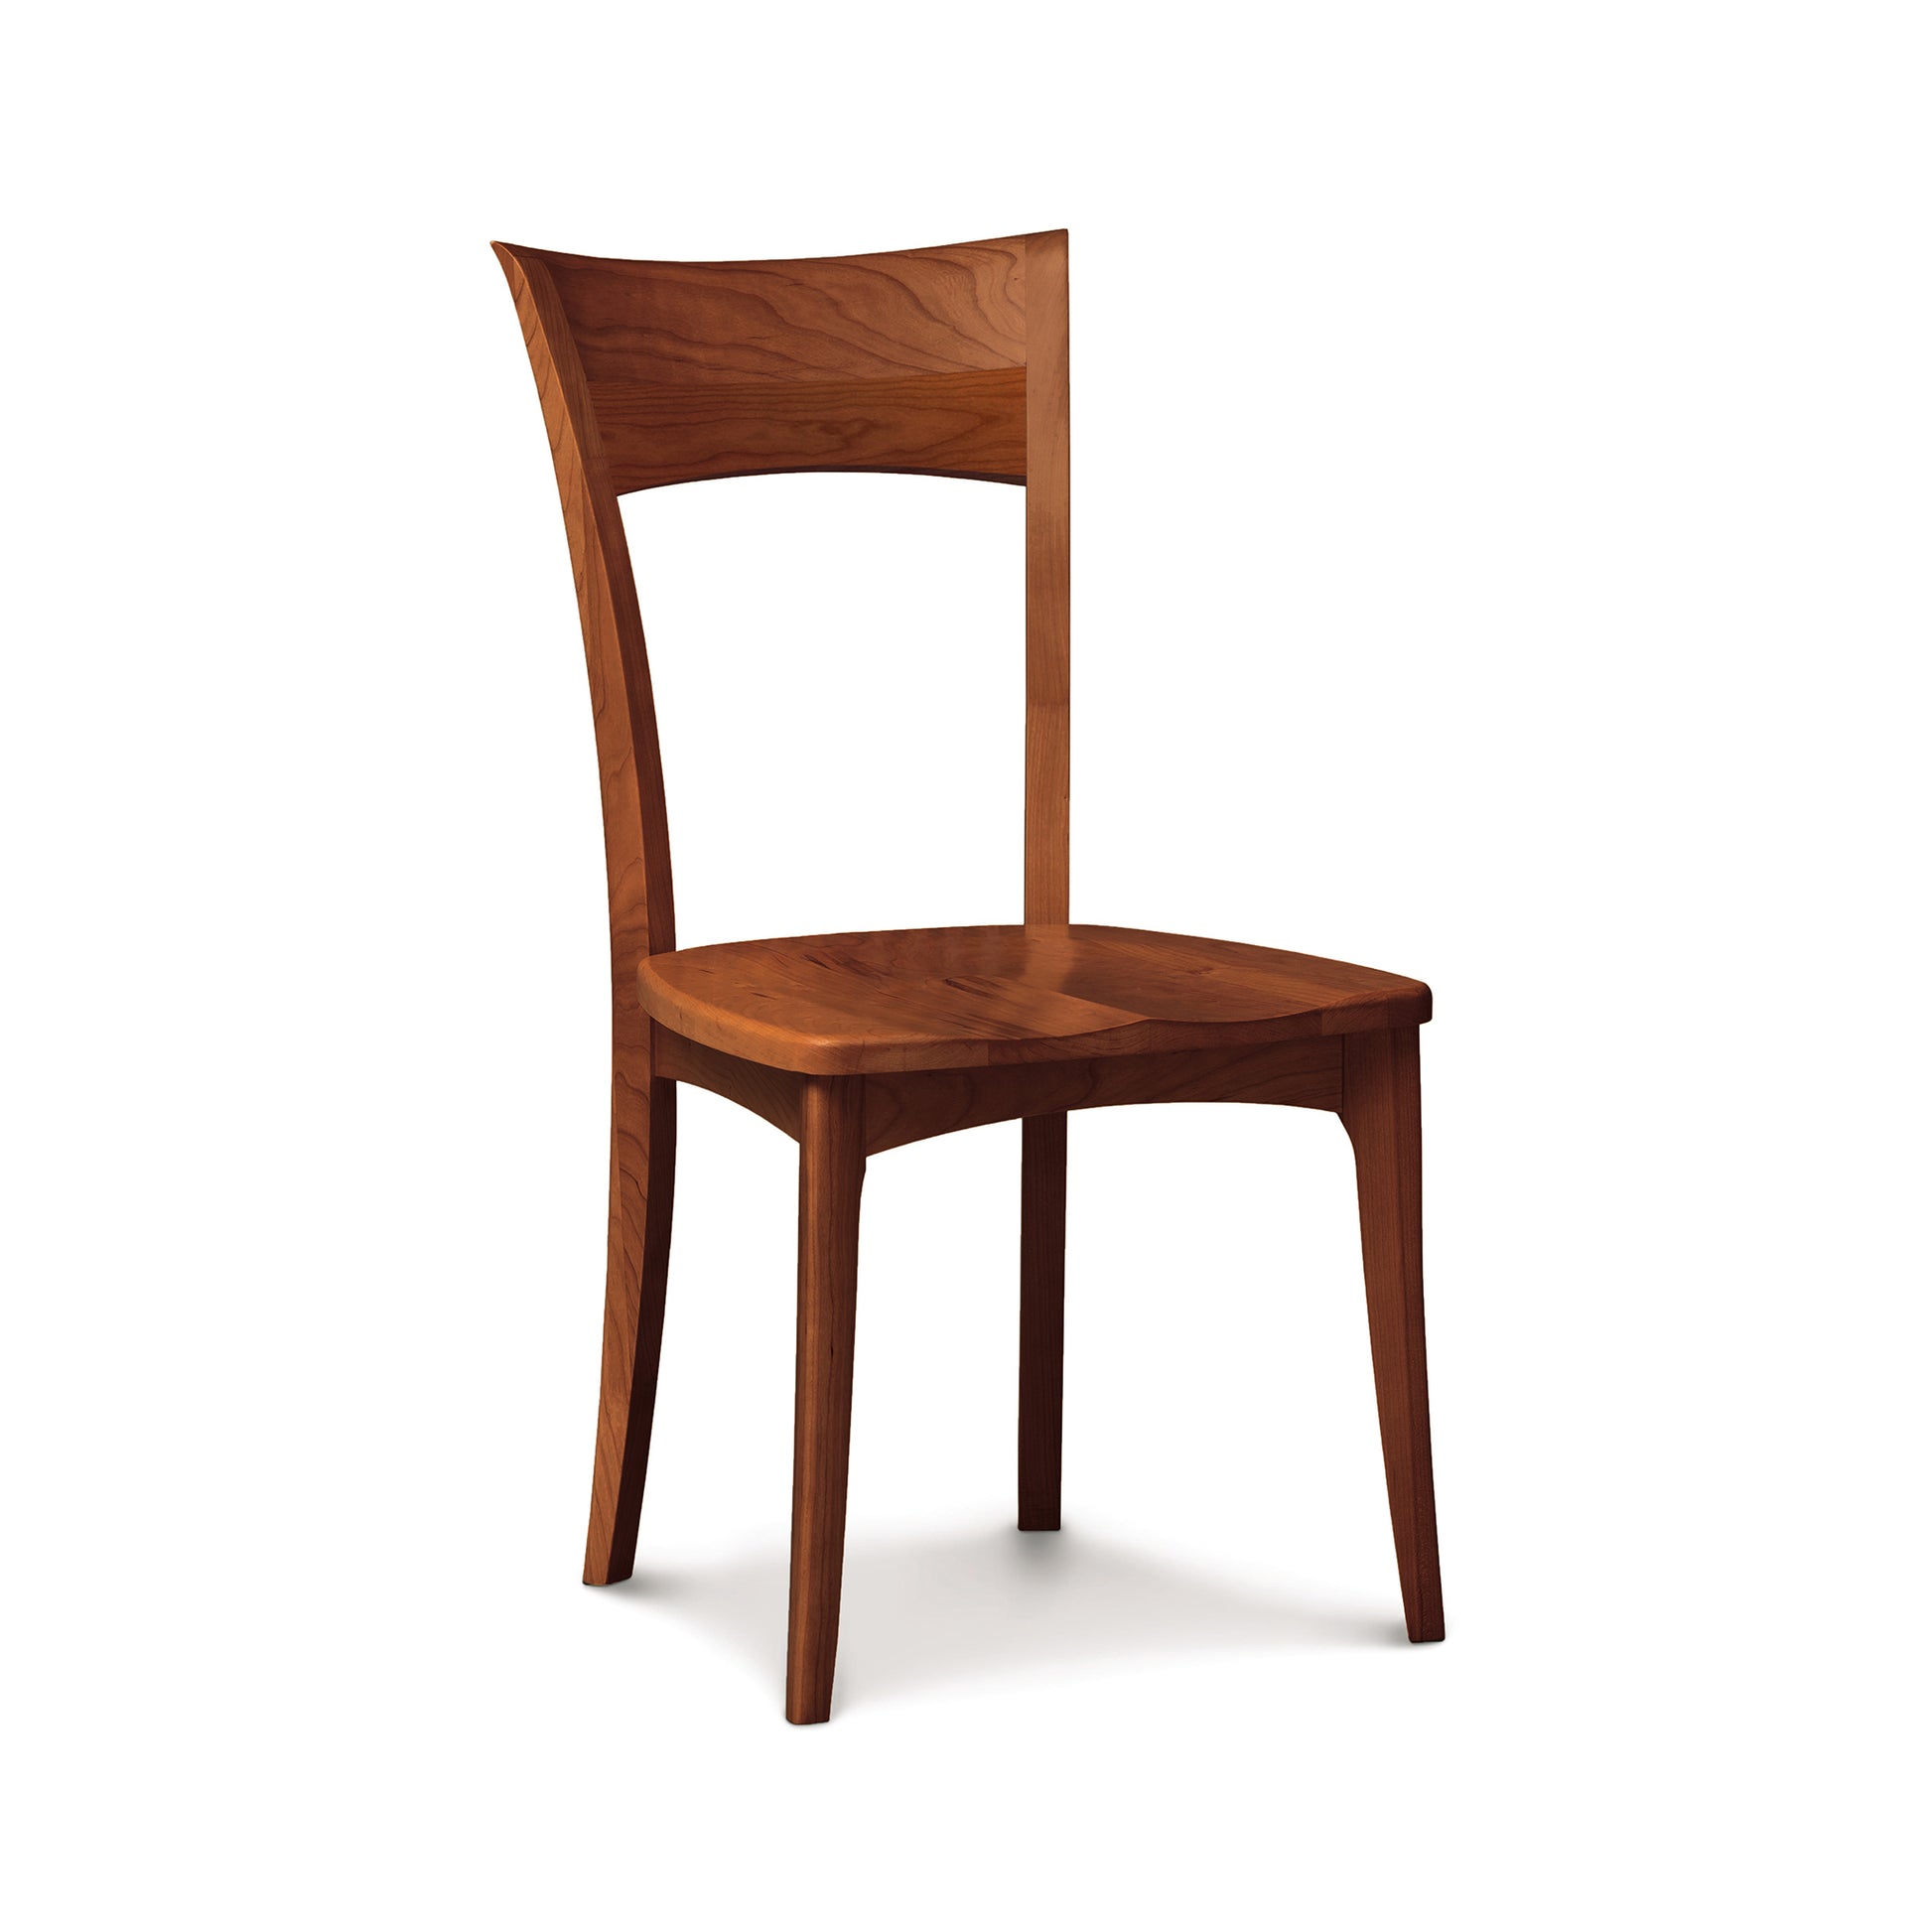 A custom fine dining Ingrid Shaker Chair with Wood Seat made of American cherry wood with a curved backrest isolated on a white background by Copeland Furniture.